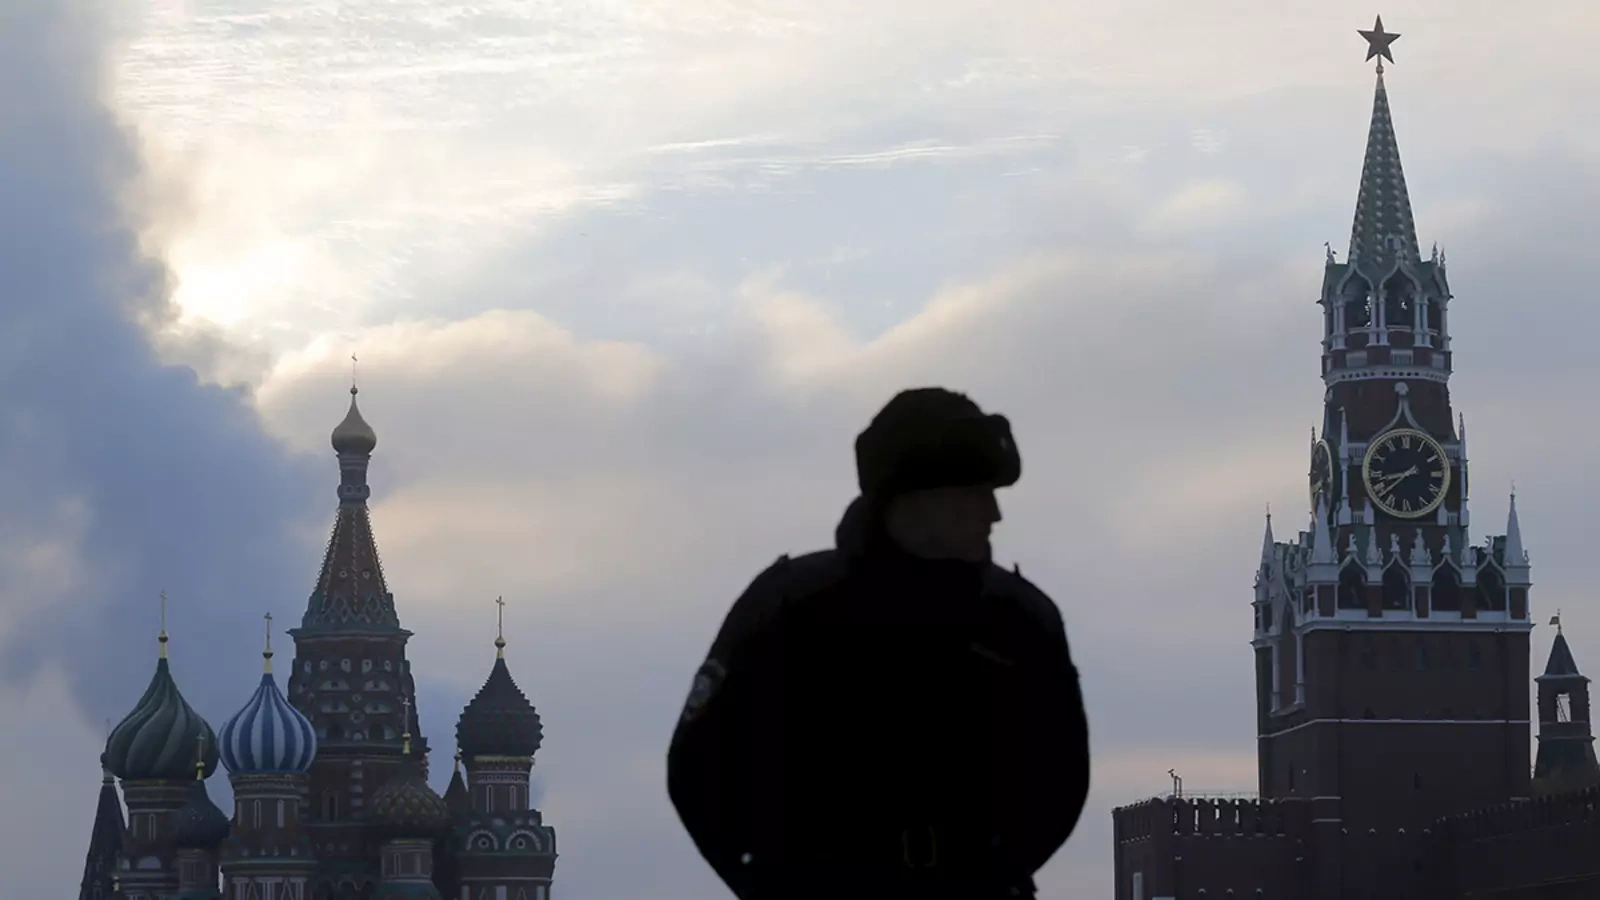 A guard stands in front of St. Basil's Cathedral and the Kremlin in Moscow, the centers of political and religious authority in Russia for much of the past several centuries.